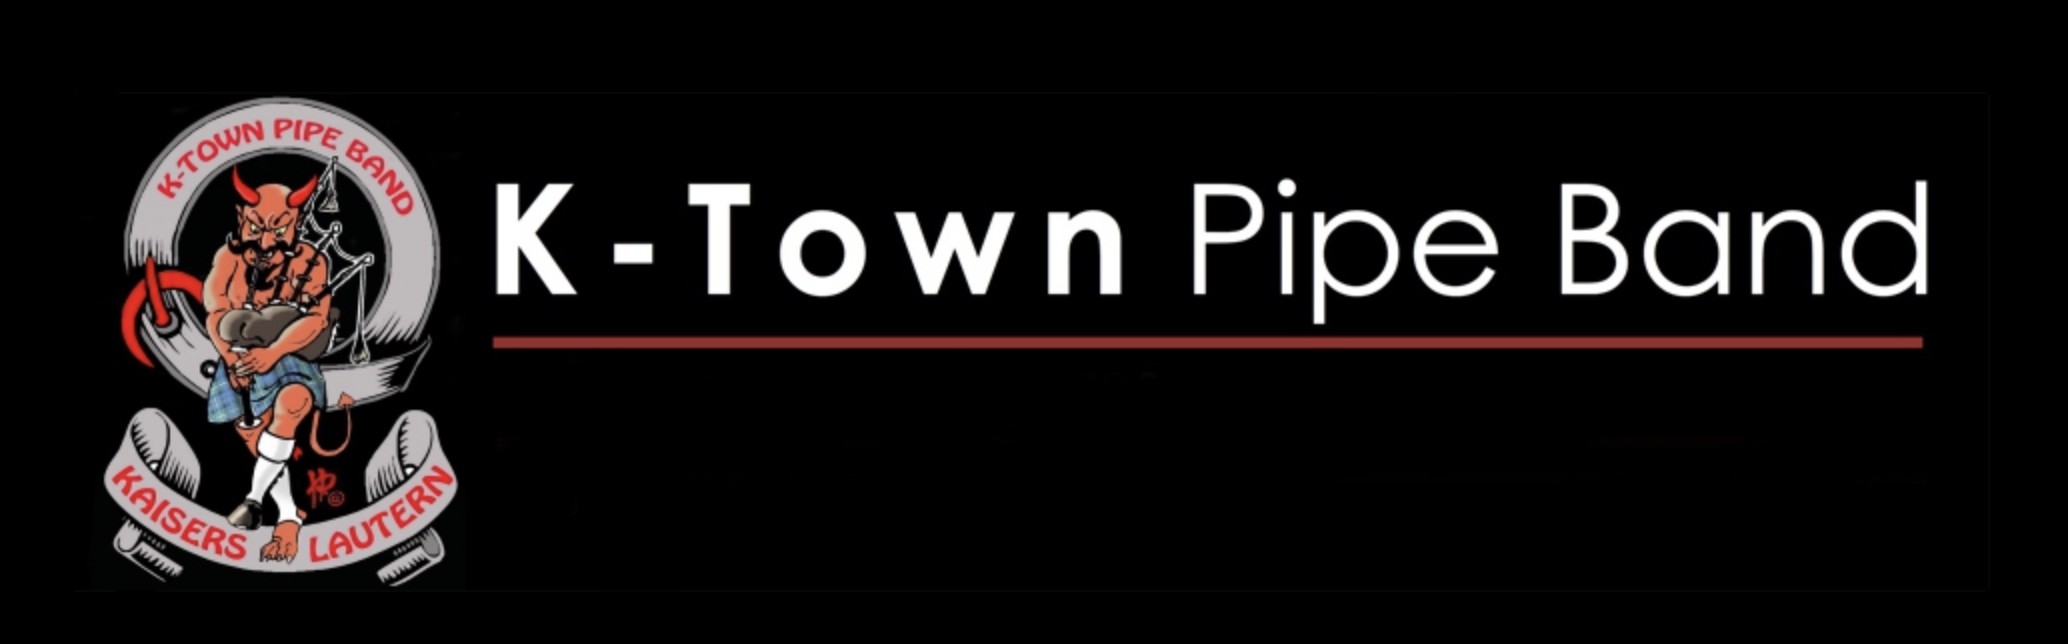 k-town-pipe-band